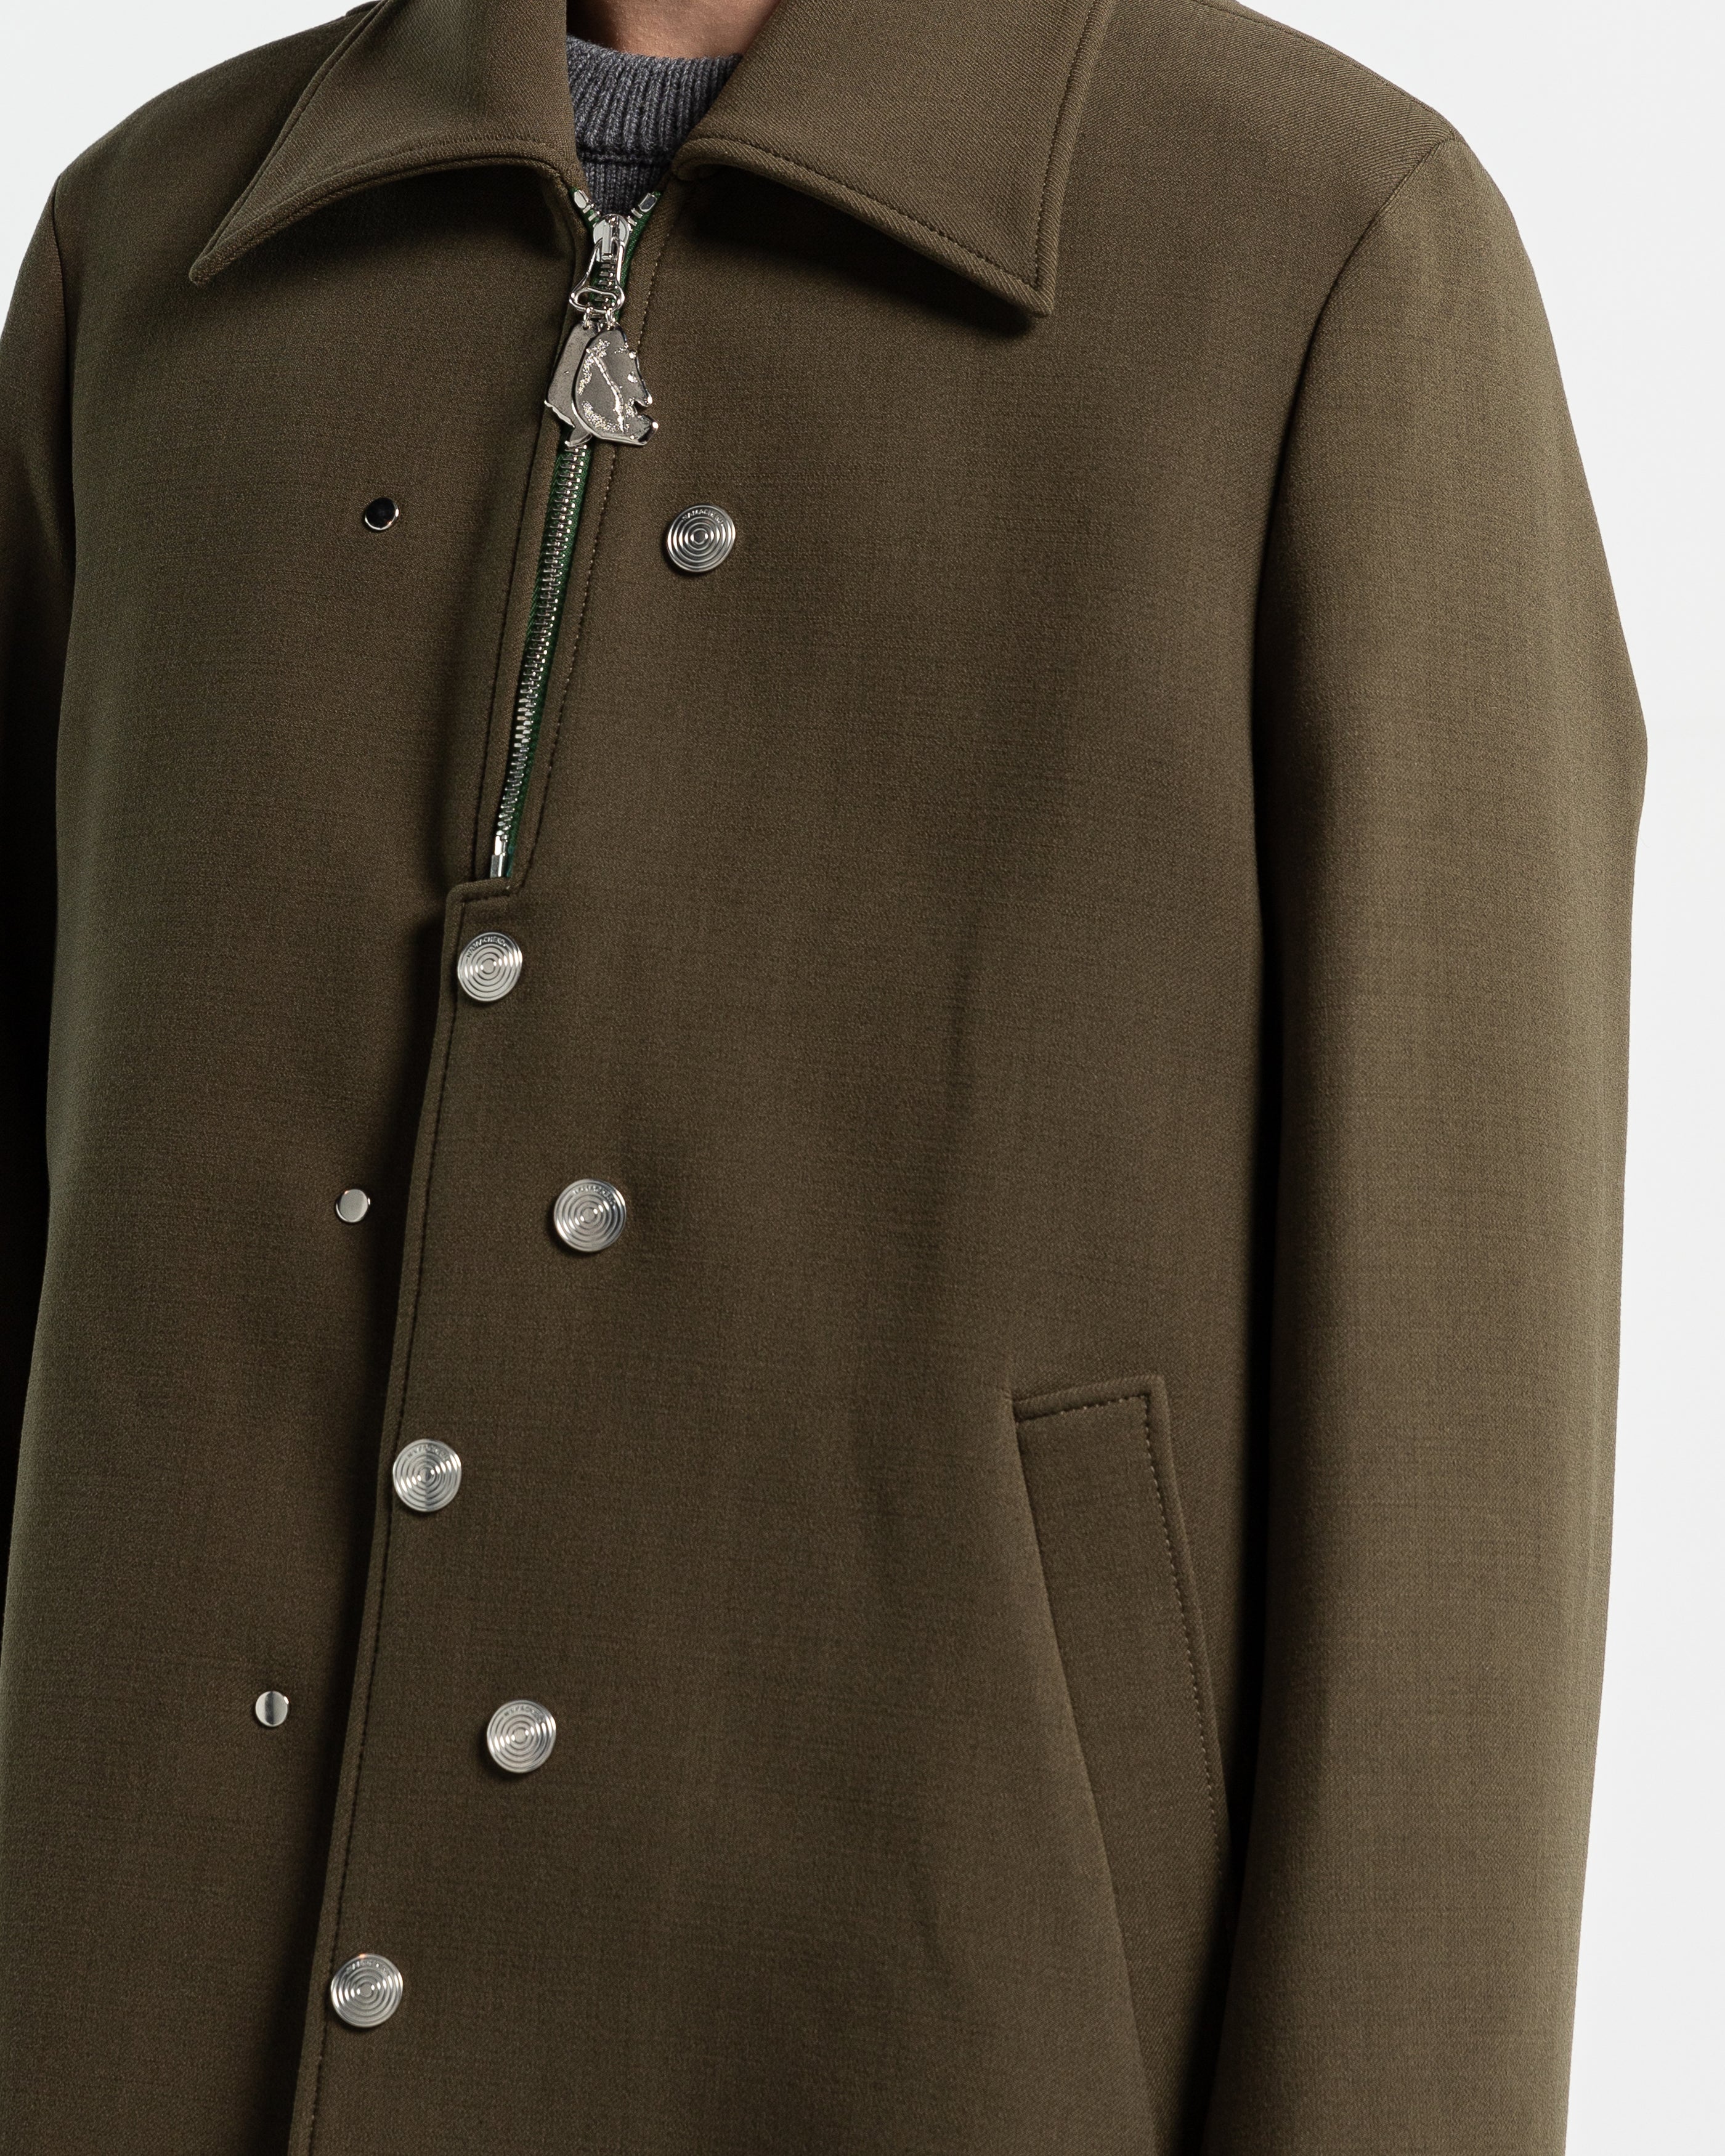 Tauther Jacket in Moss Green